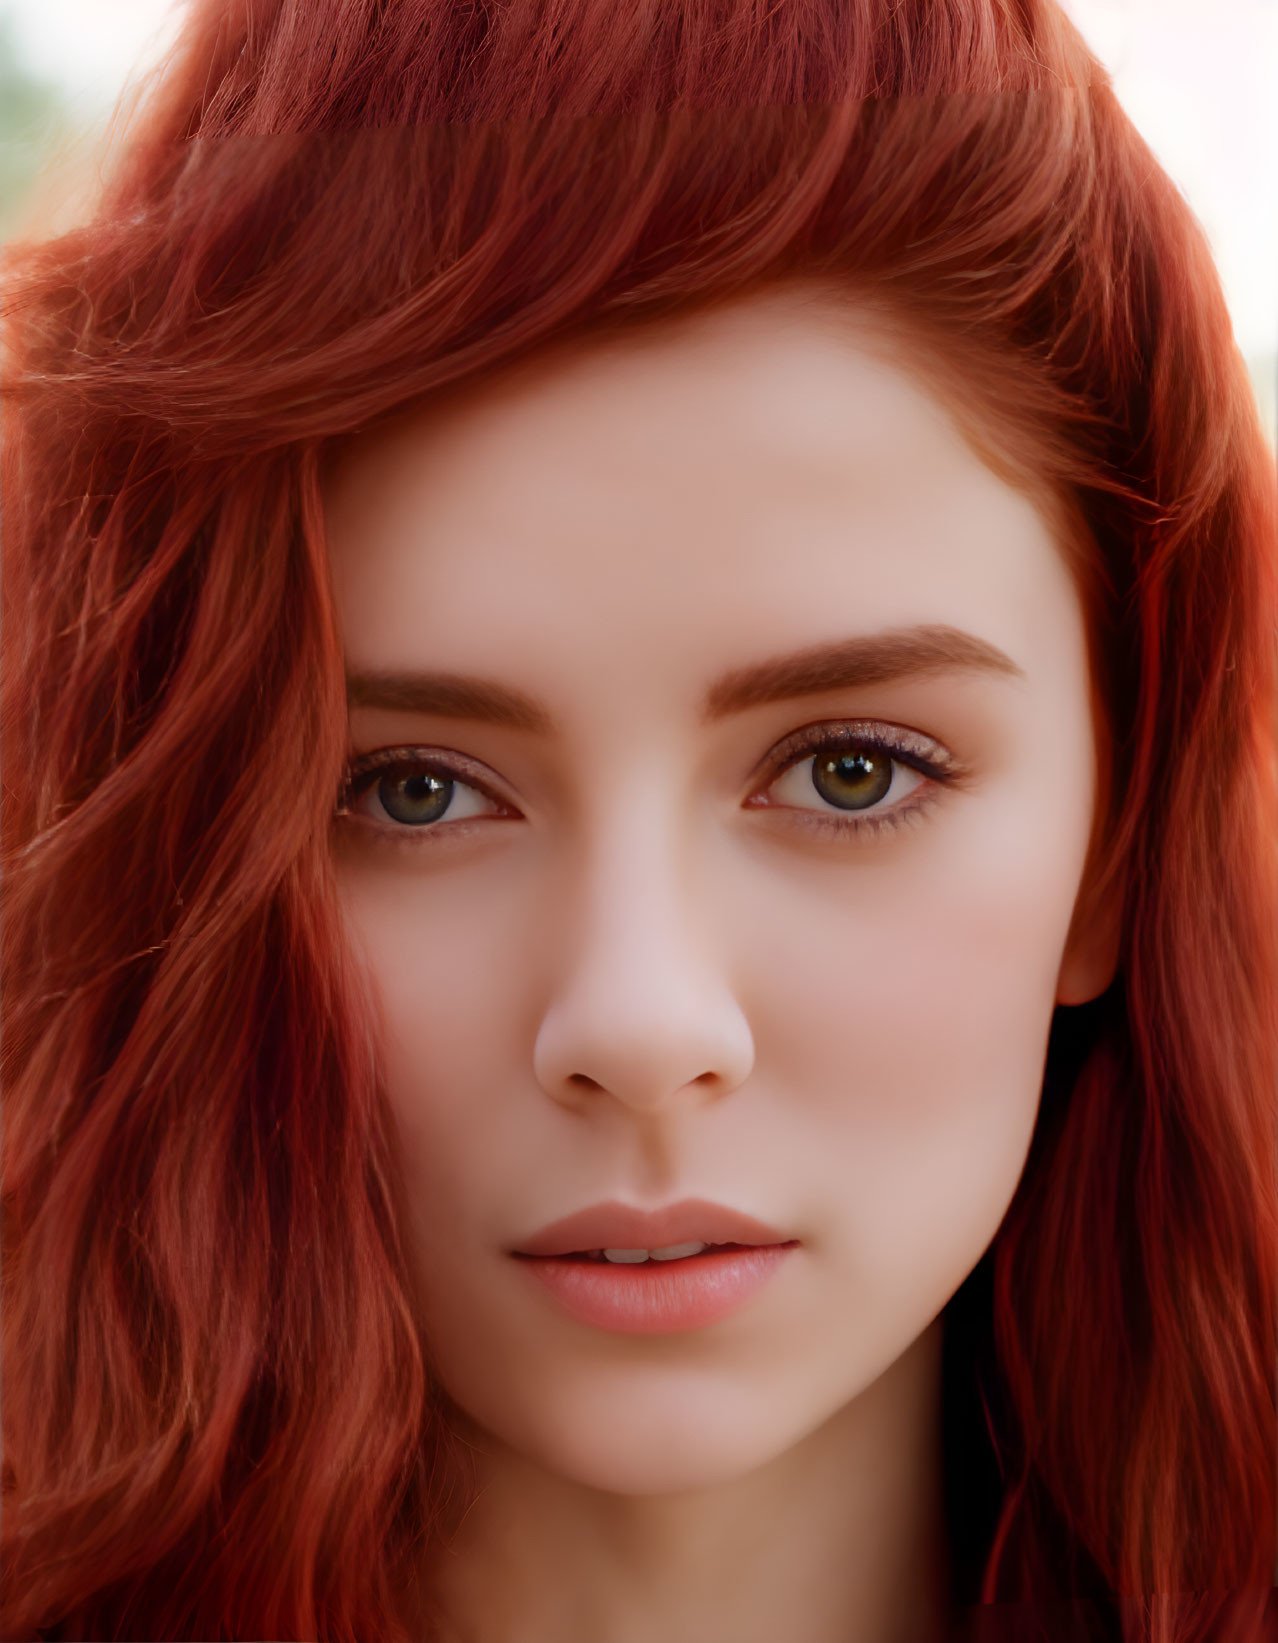 Red-haired woman with green eyes in close-up portrait.